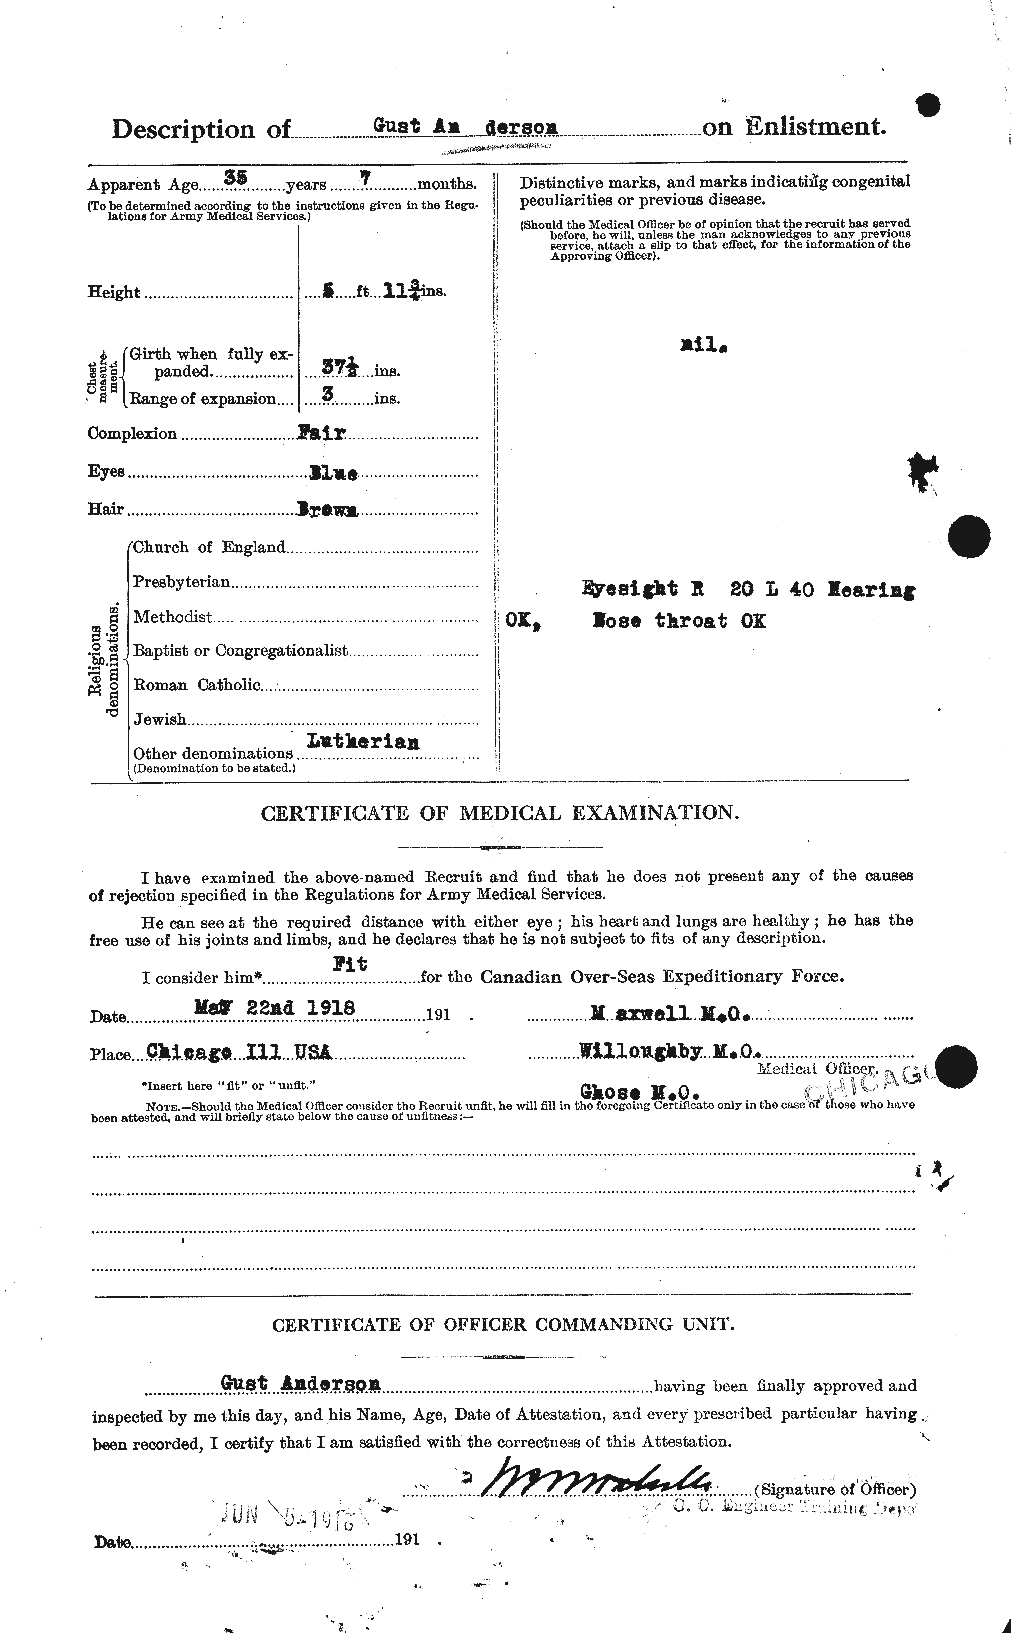 Personnel Records of the First World War - CEF 209652b